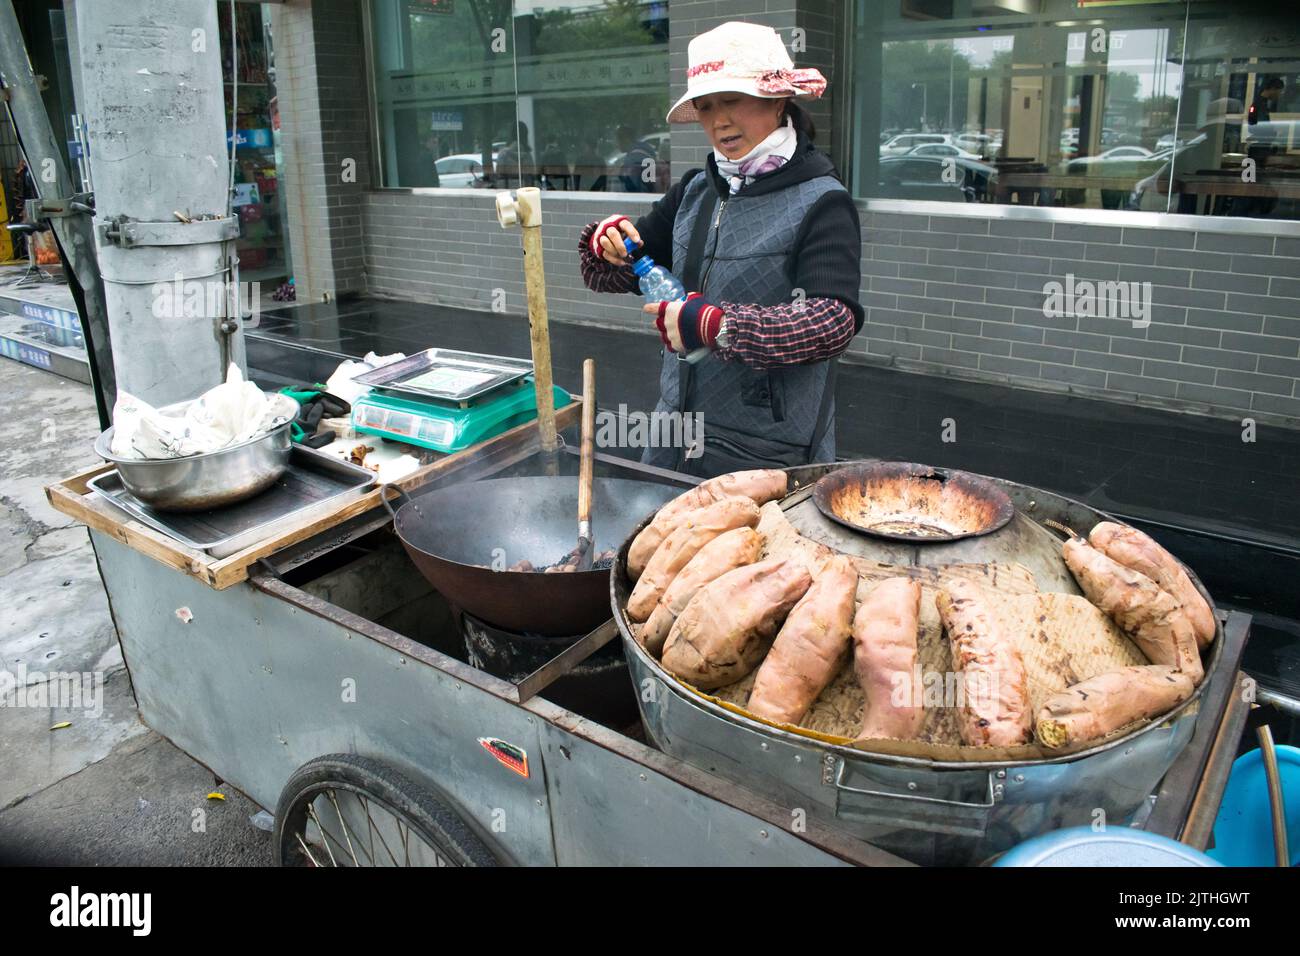 Street food, roasted Sweet Potatoes and Chestnuts roasted in a wok sold by a Chinese vendor. Stock Photo